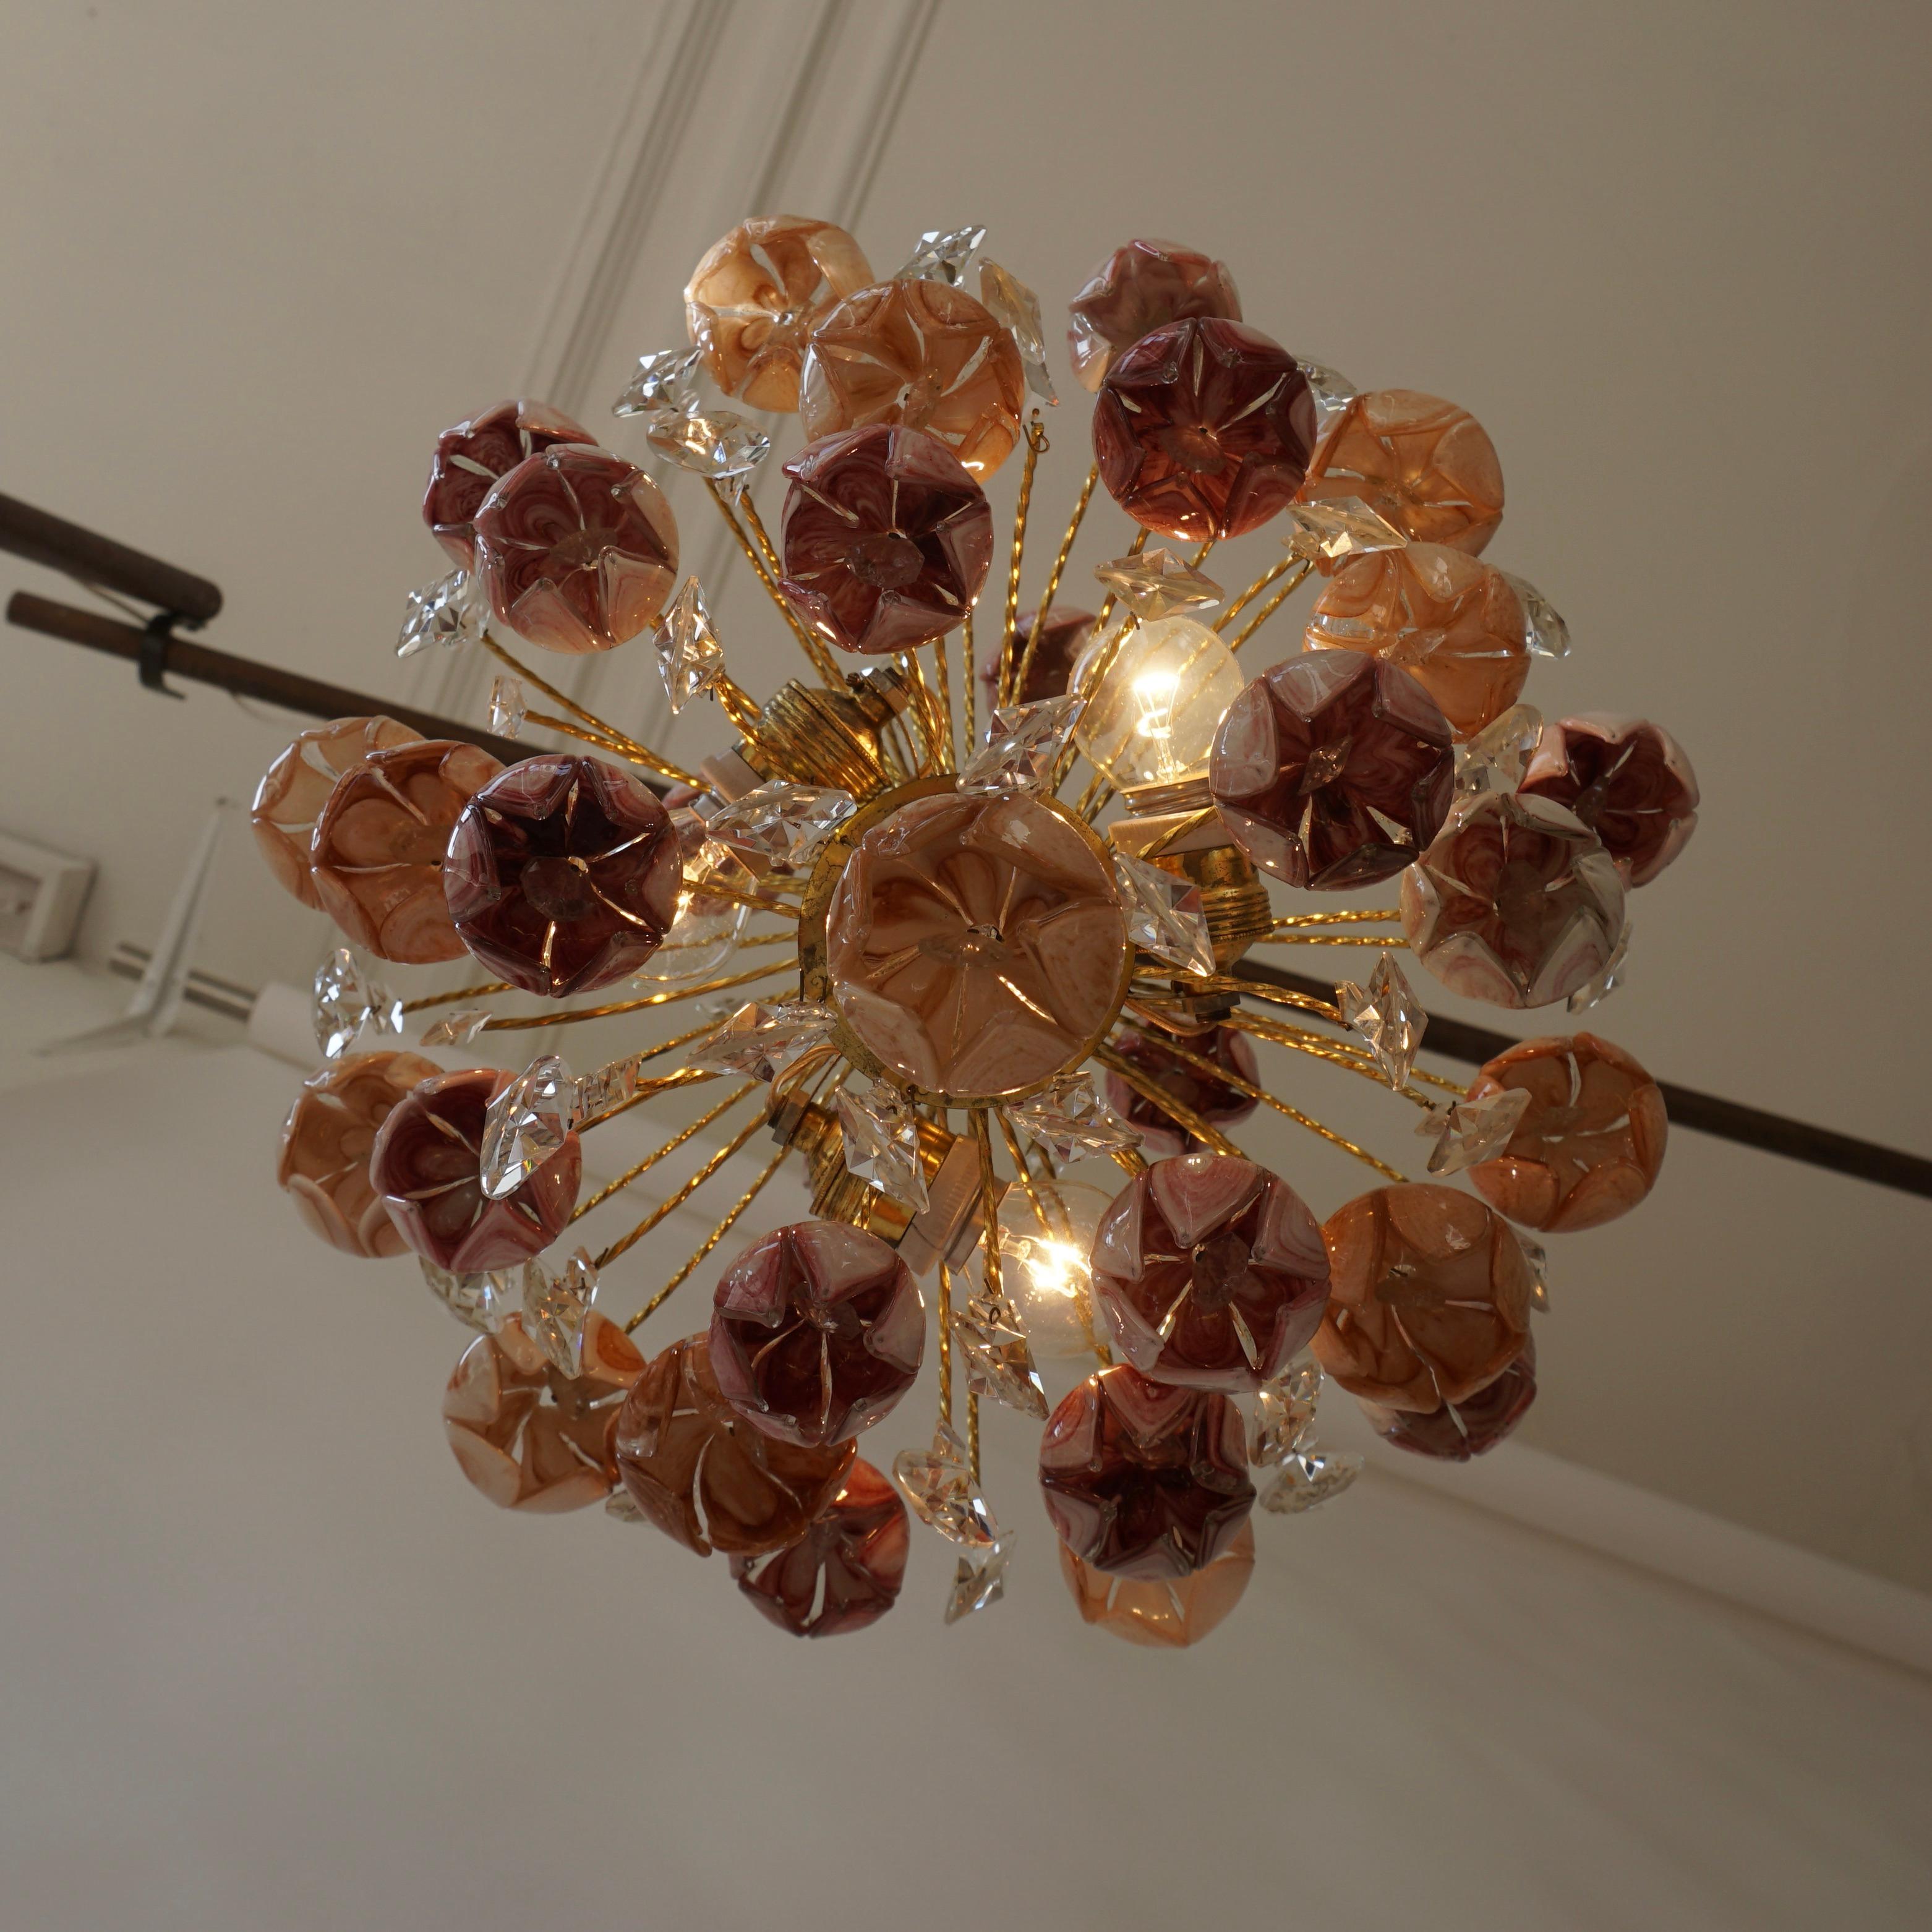 Pair of Murano Glass Floral Chandeliers, Italy, 1970s For Sale 7